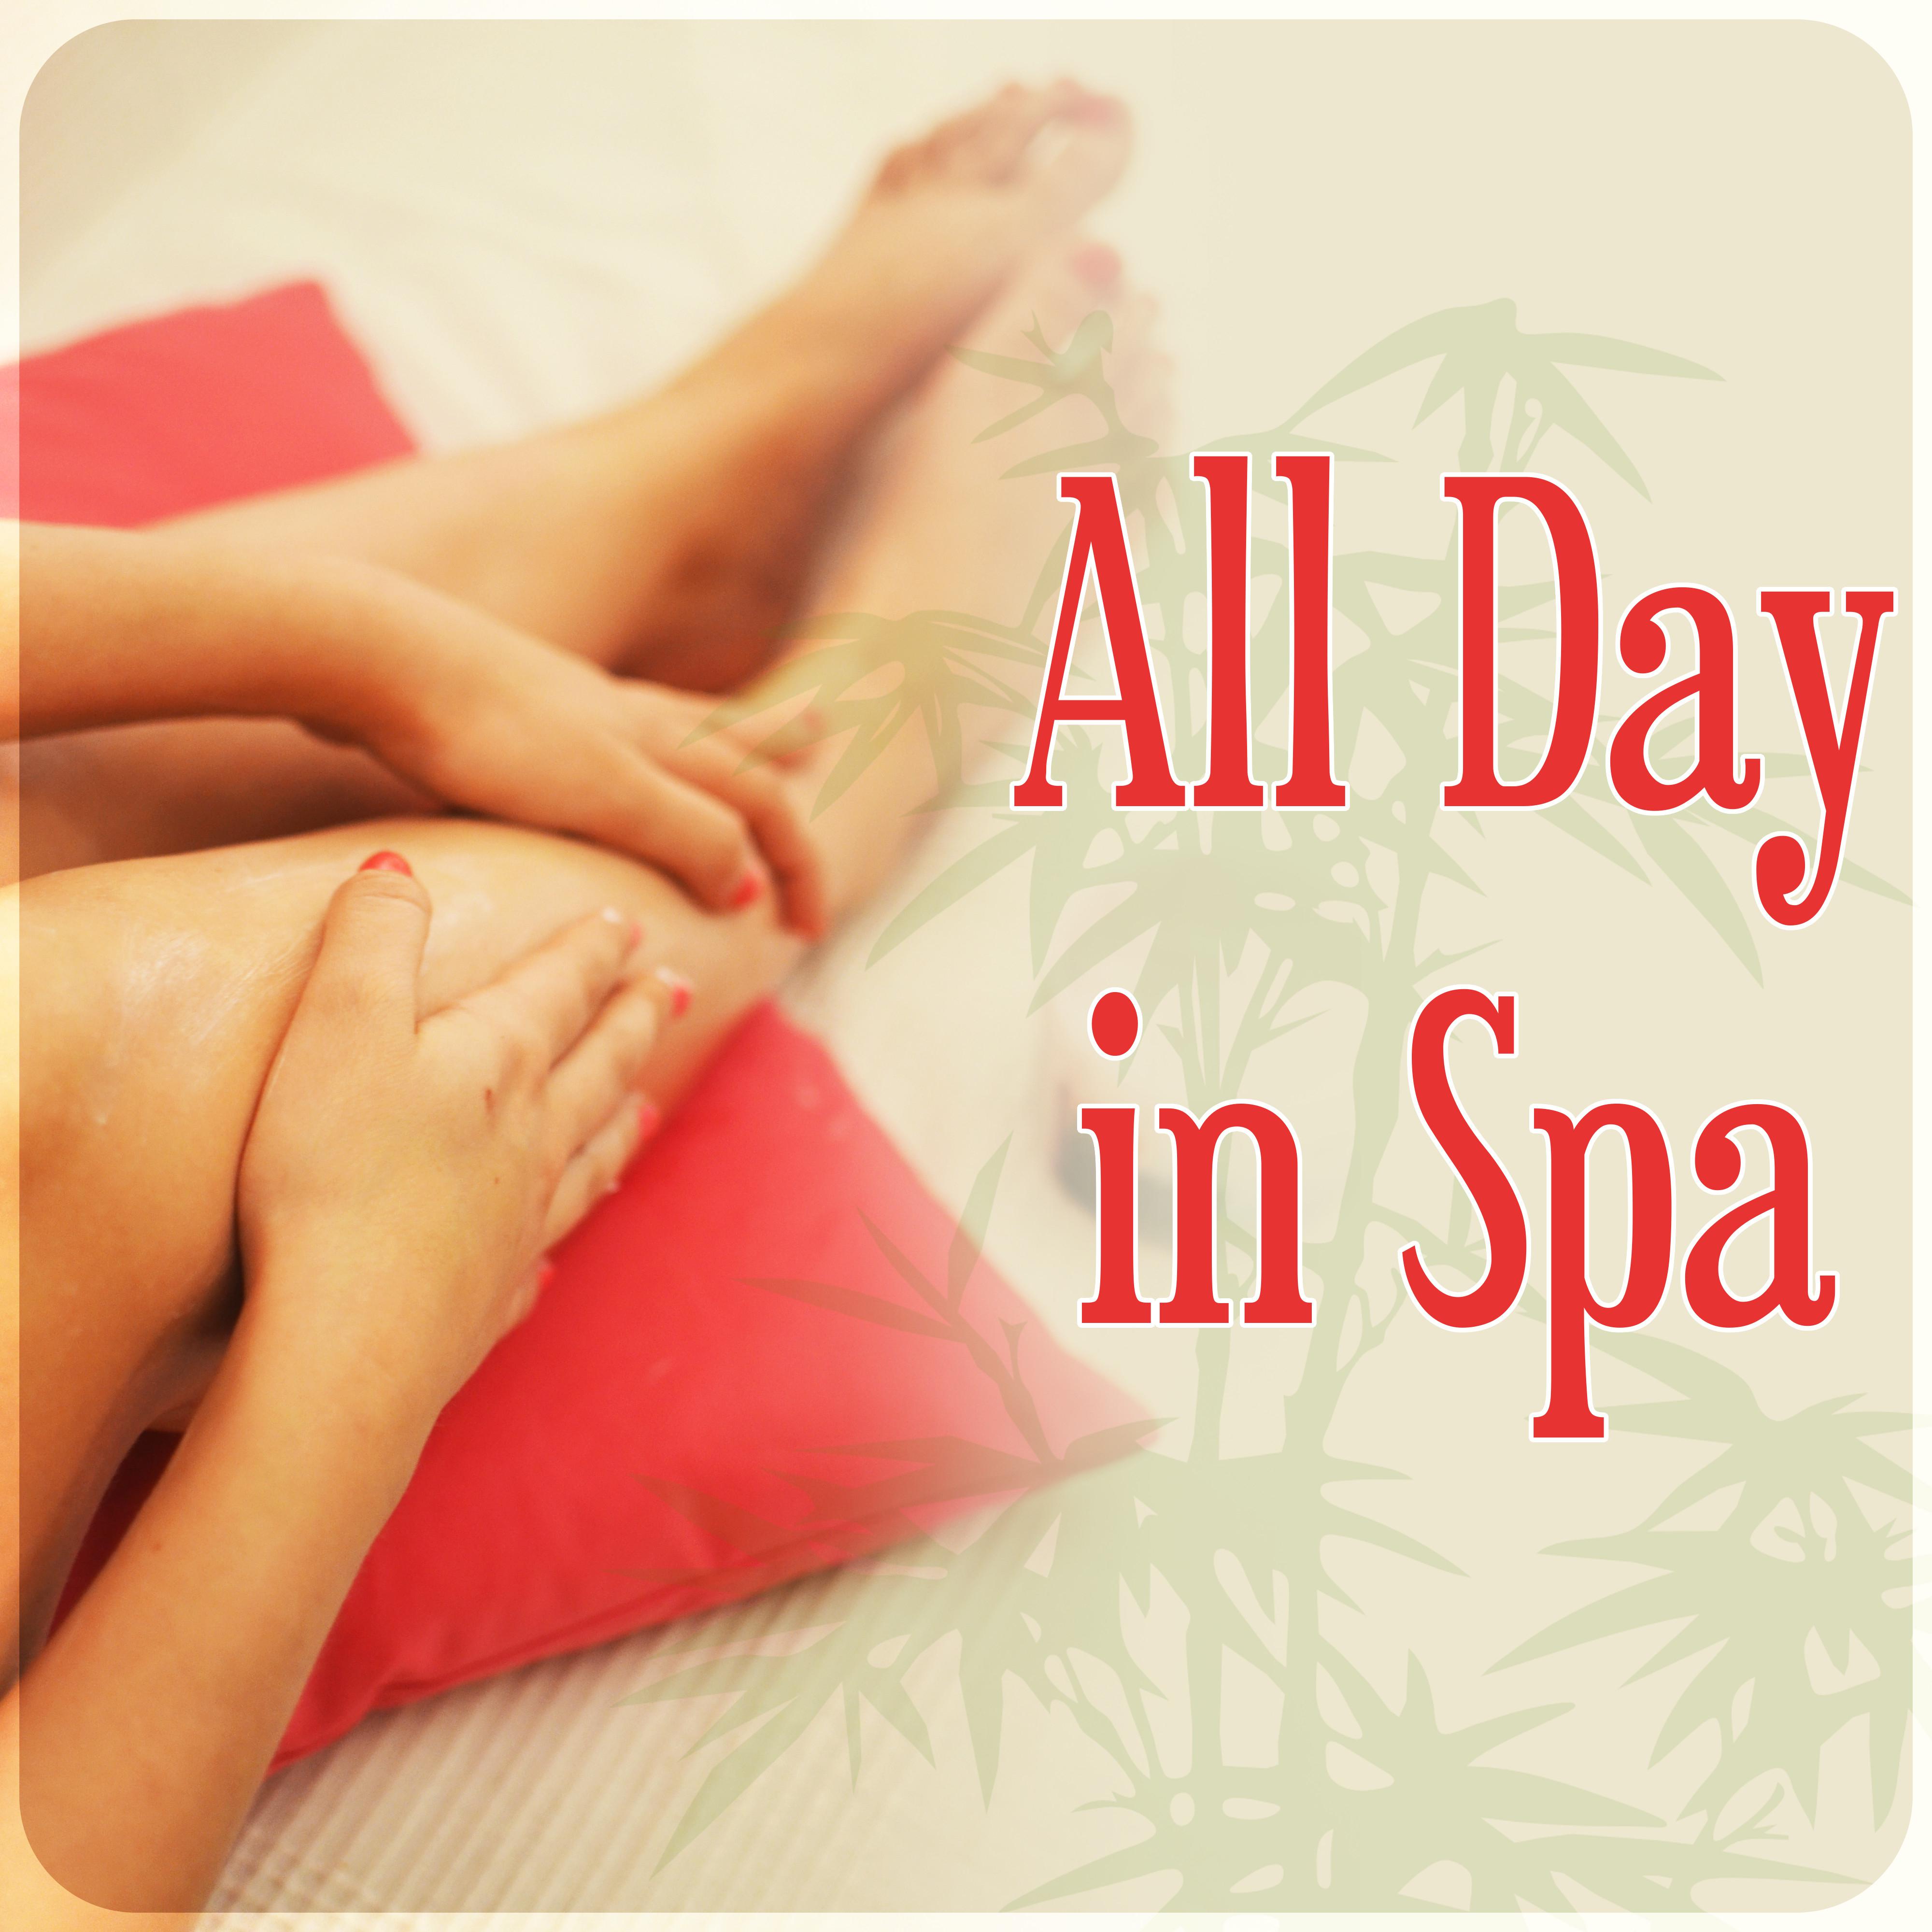 All Day in Spa - Beautiful Spa, Nature Sounds for Yoga, Massage, Deep Relaxation with Calm Background Music, Mindfulness Meditation